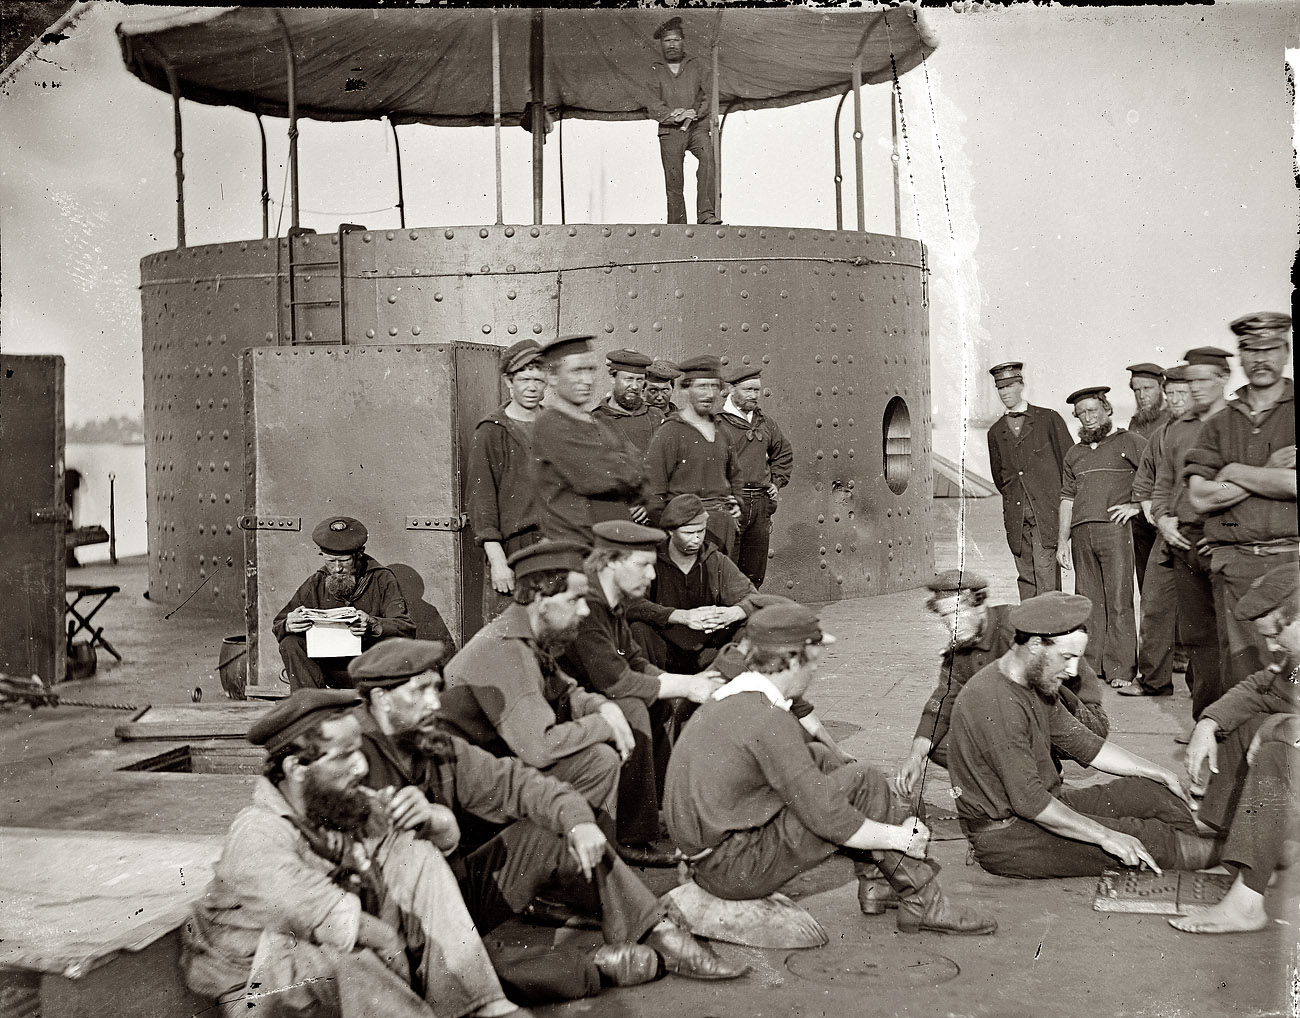 July 9, 1862. "James River, Virginia. Sailors relaxing on deck of the U.S.S. Monitor." From photographs of the Federal Navy and seaborne expeditions against the Atlantic Coast of the Confederacy, 1861-1865. View full size. Wet plate negative, left half of stereograph pair. Photograph by James F. Gibson.